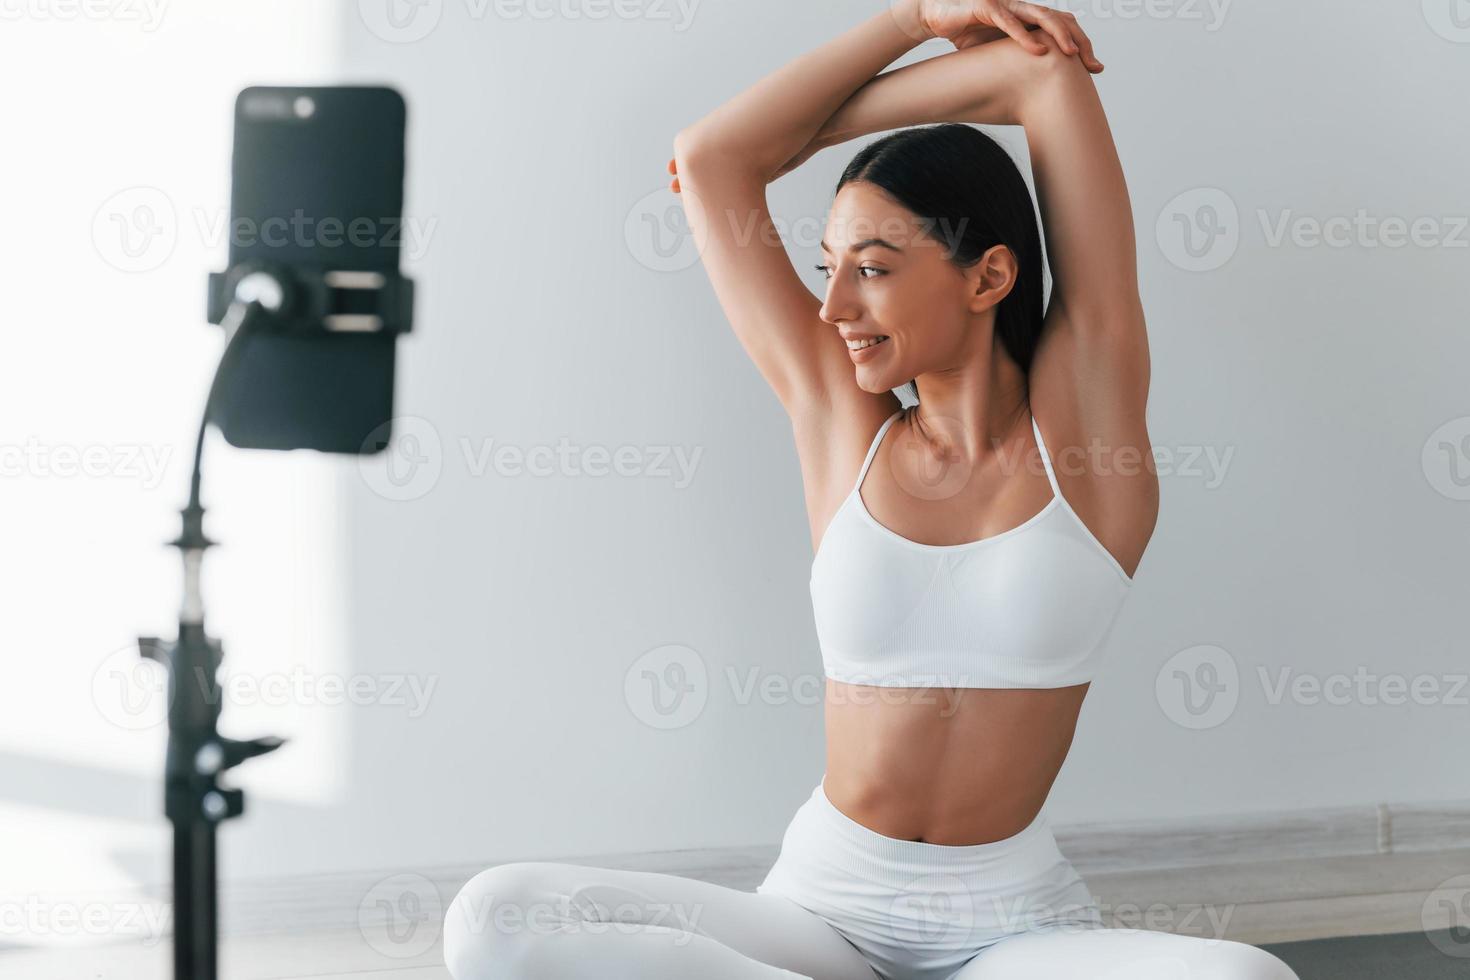 Phone on tripod. Young caucasian woman with slim body shape is indoors at daytime photo